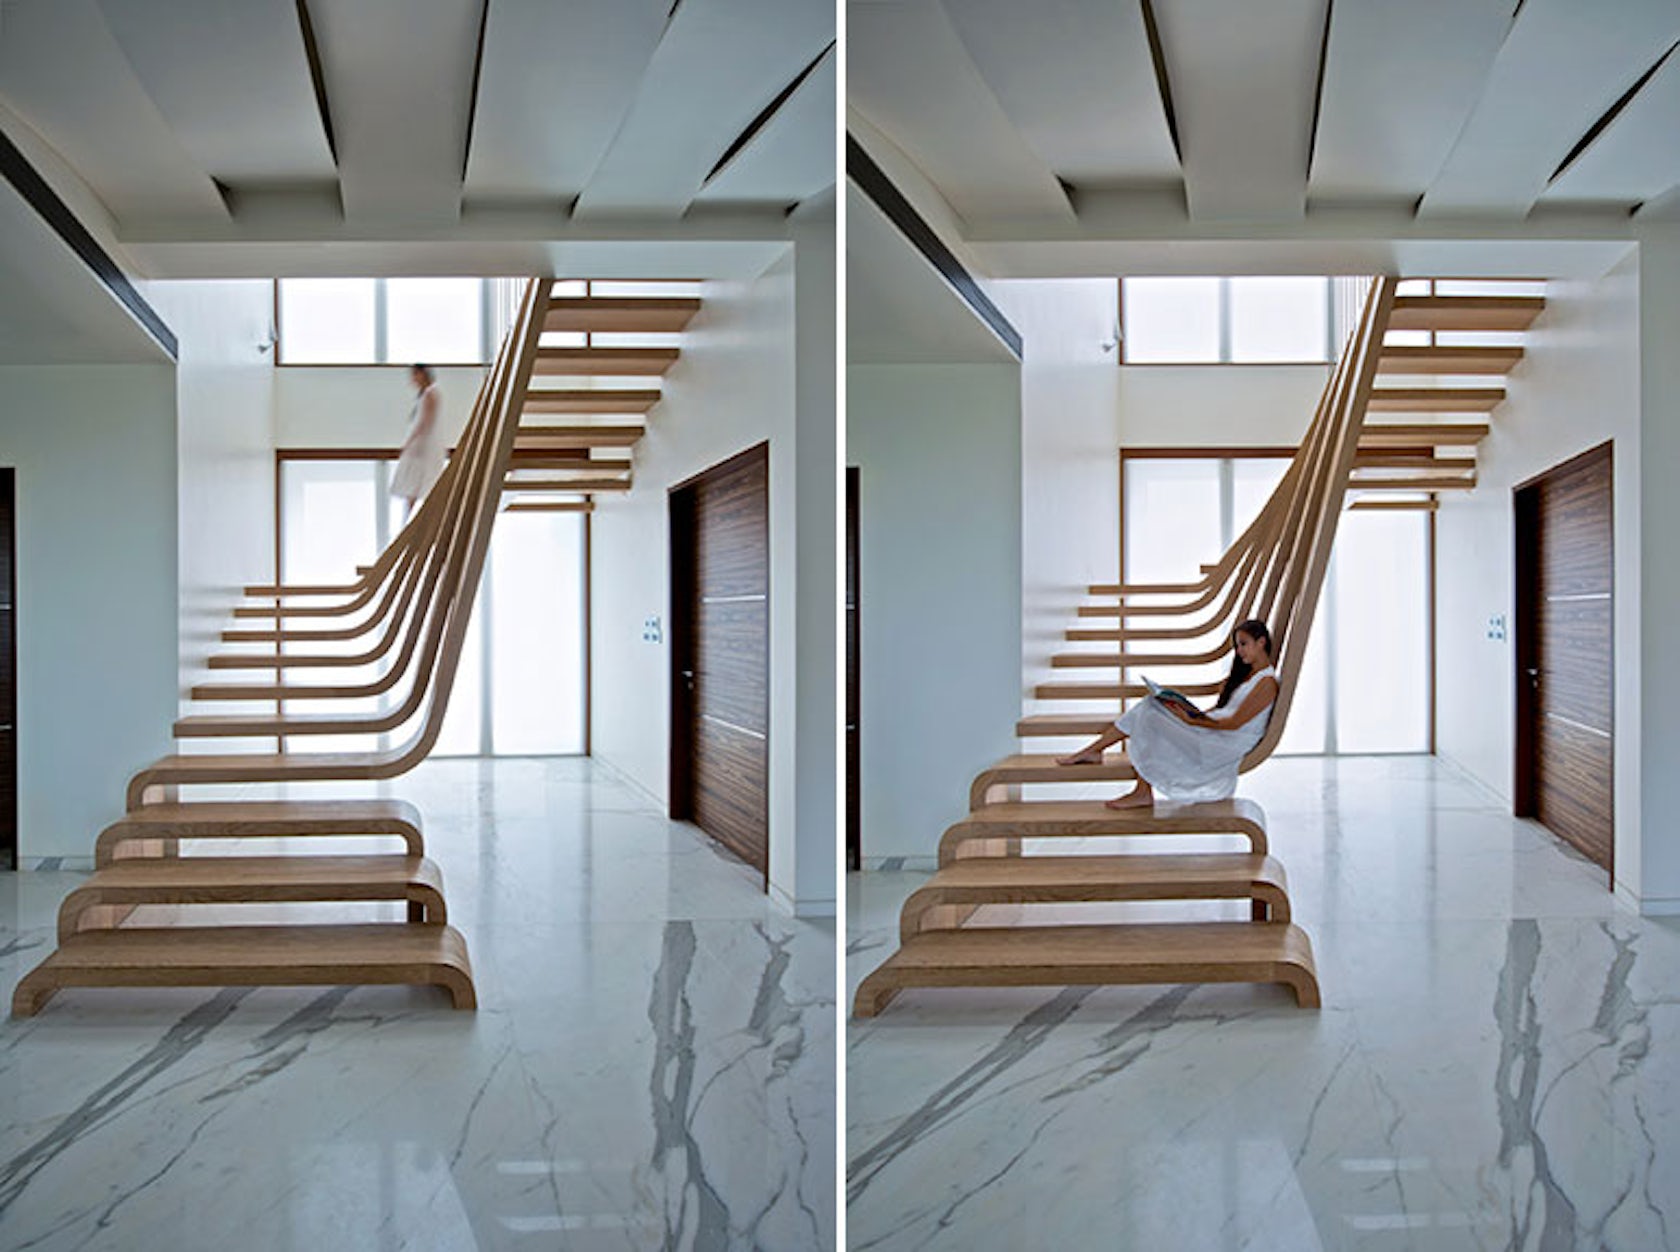 30+ Examples of Modern Stair Design That Are a Step Above the Rest